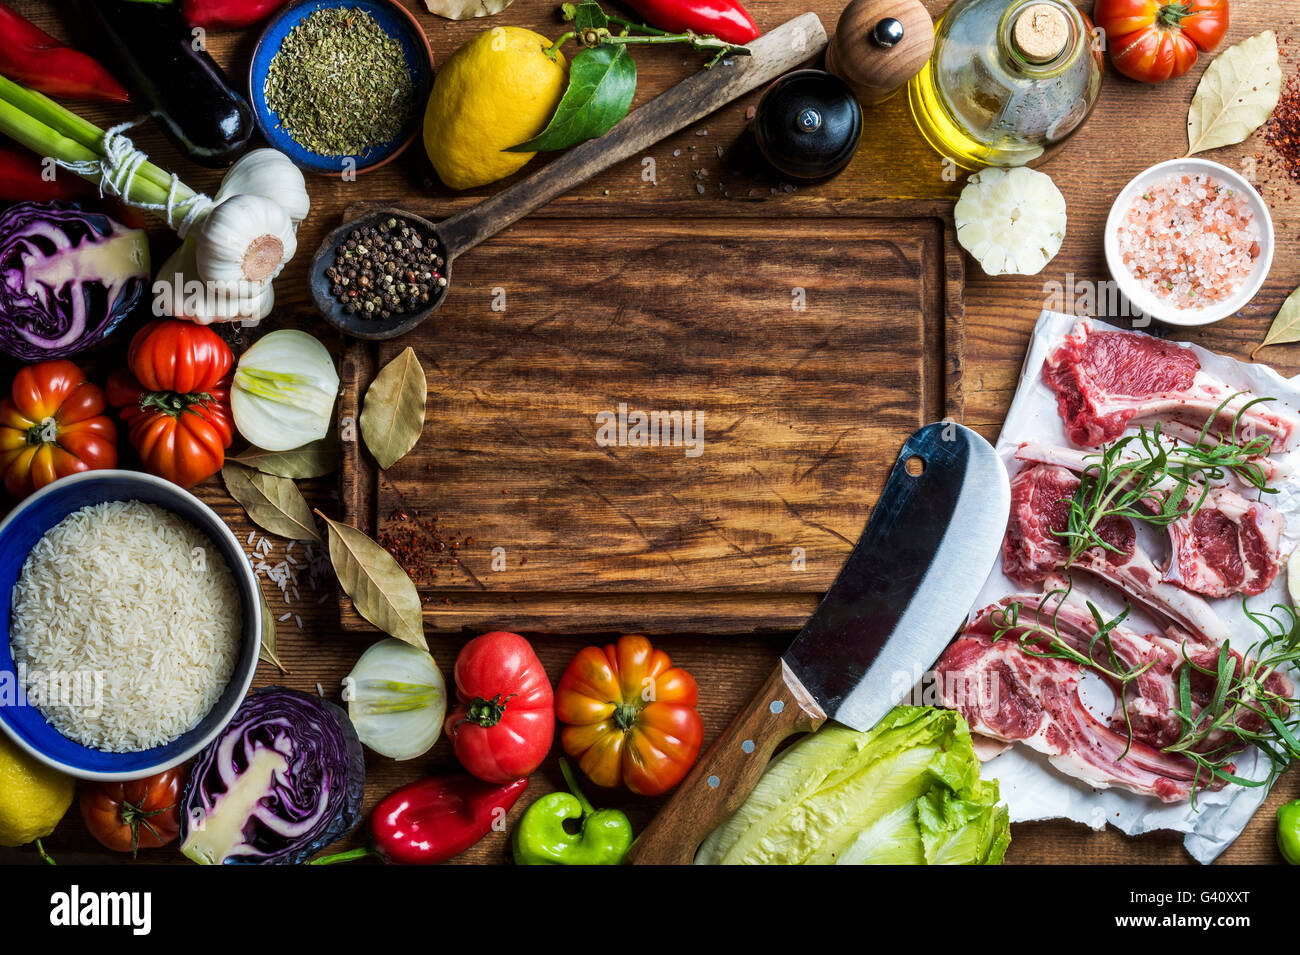 Ingredients for cooking healthy meat dinner. Raw uncooked lamb chops with vegetables, rice, herbs and spices over rustic wooden Stock Photo